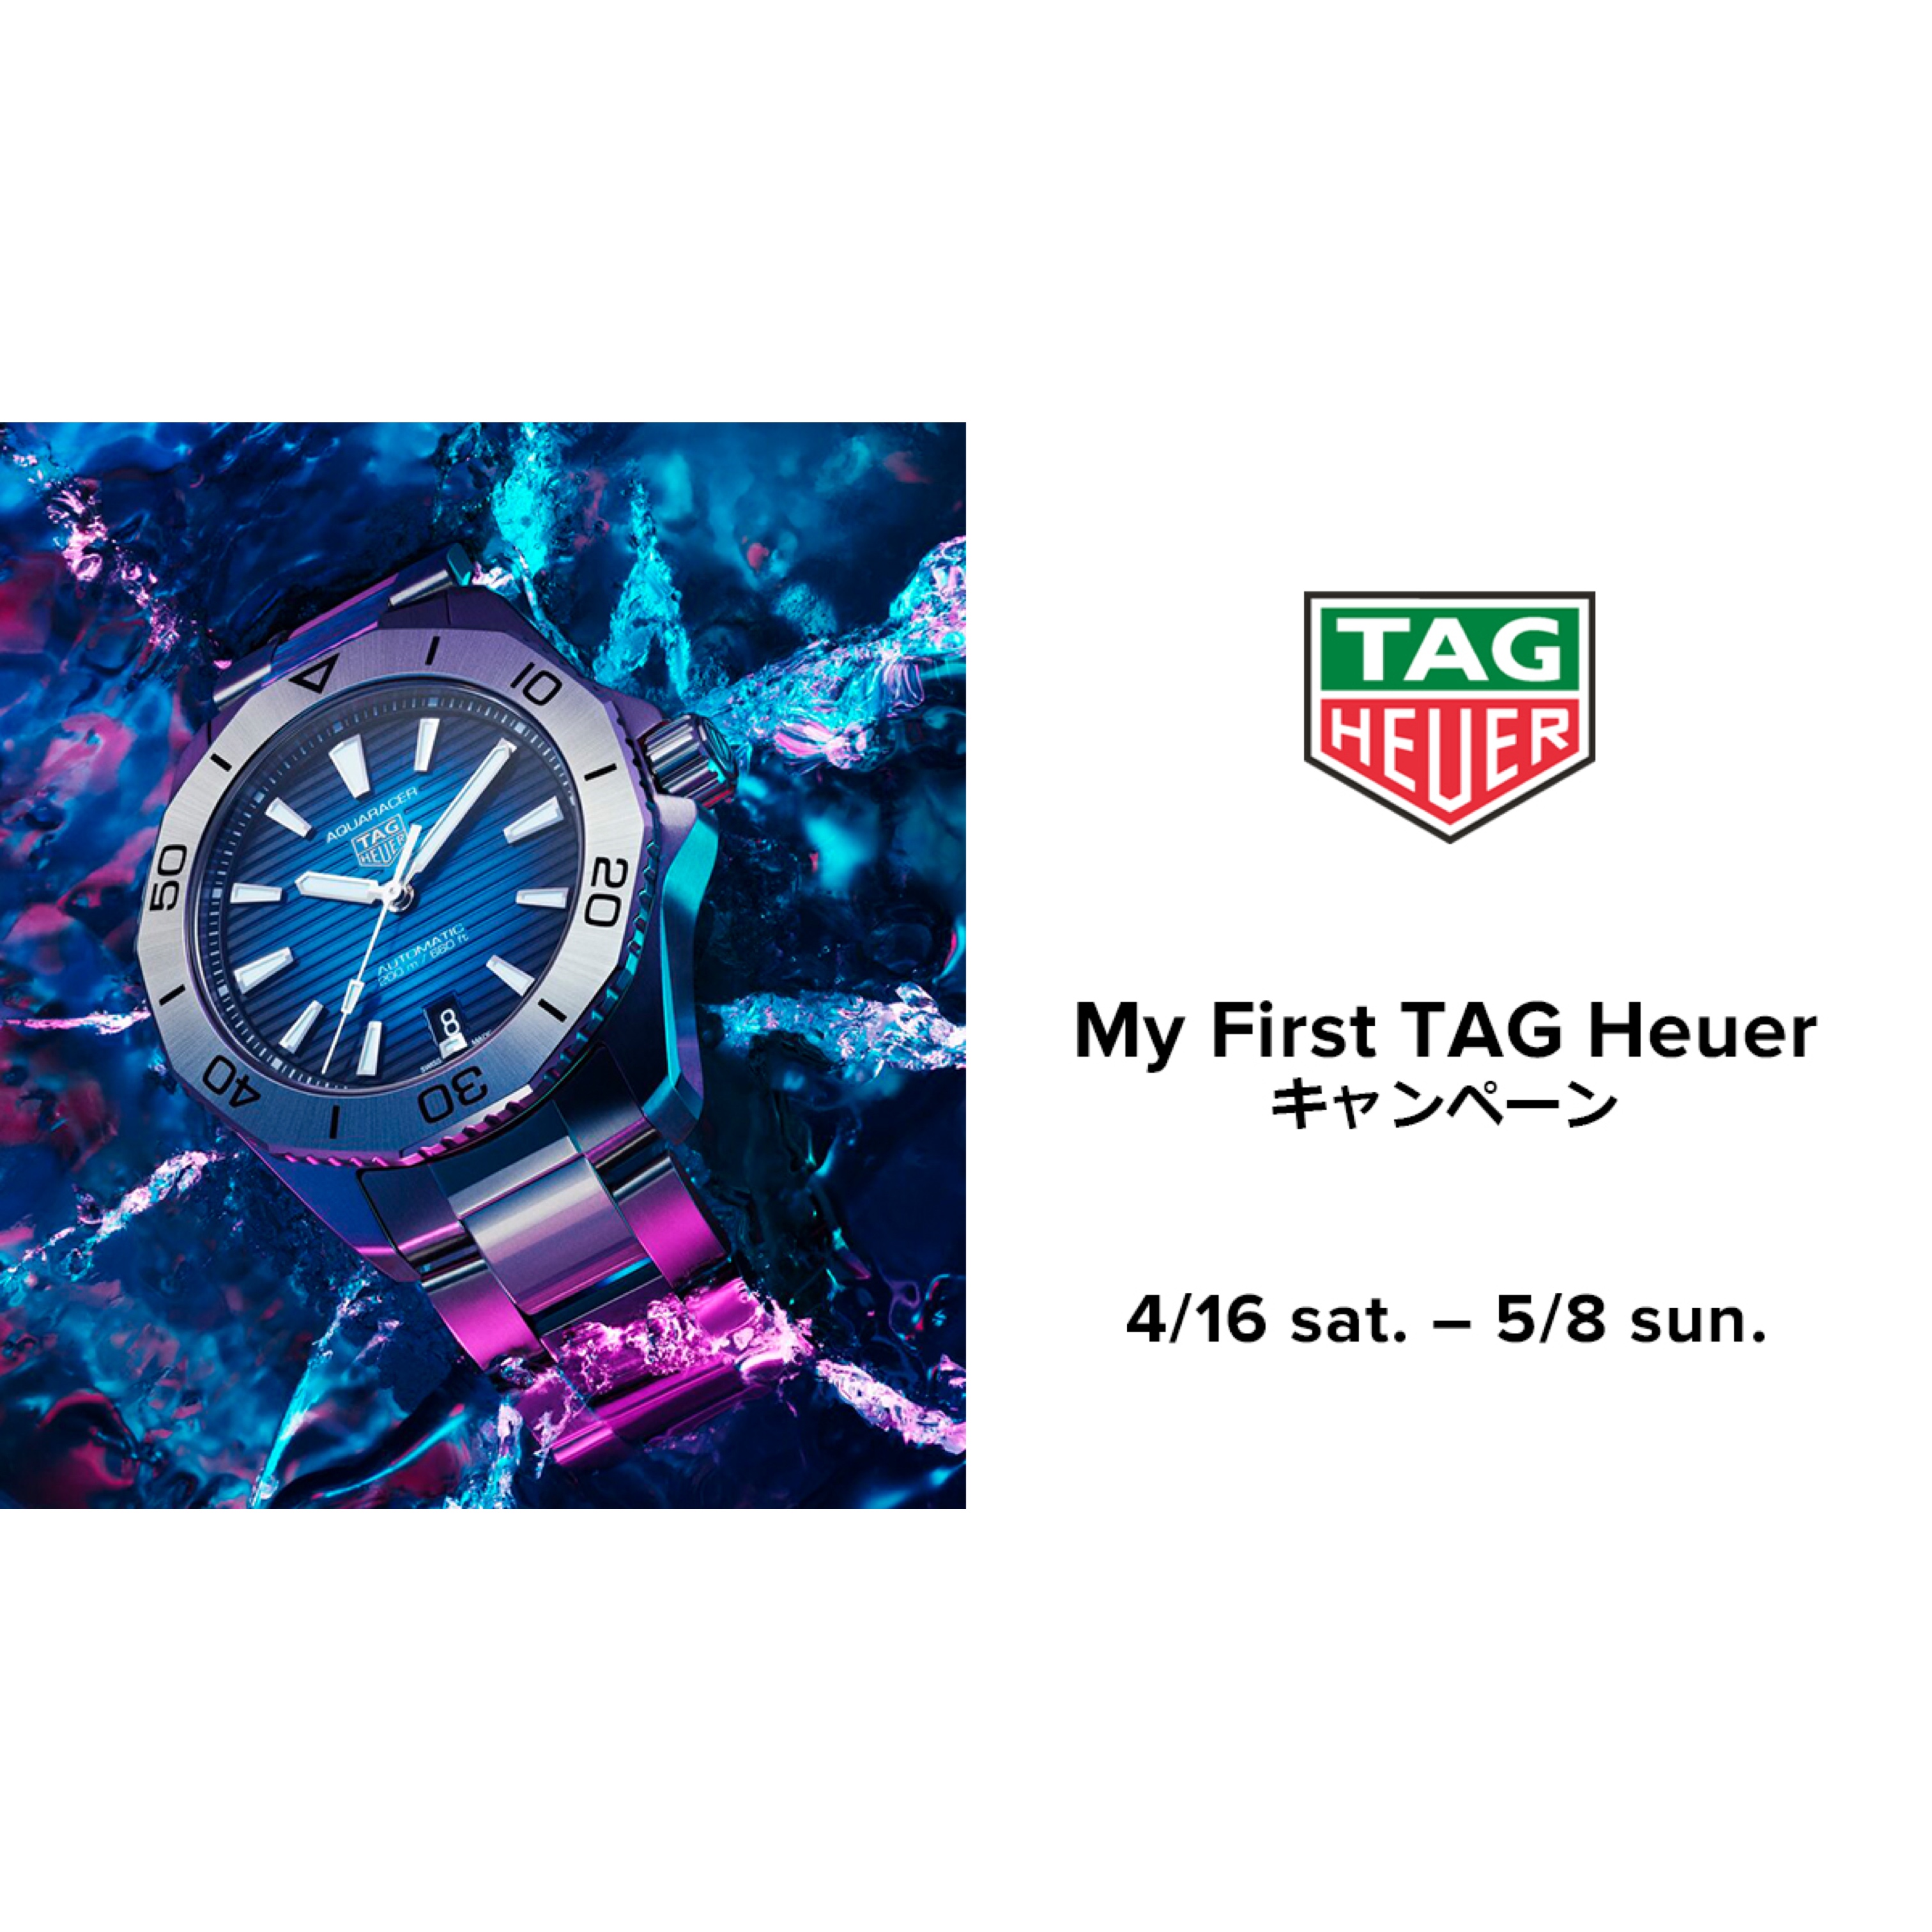 【TAG Heuer】My First TAG Heuer キャンペーン 5/8日まで